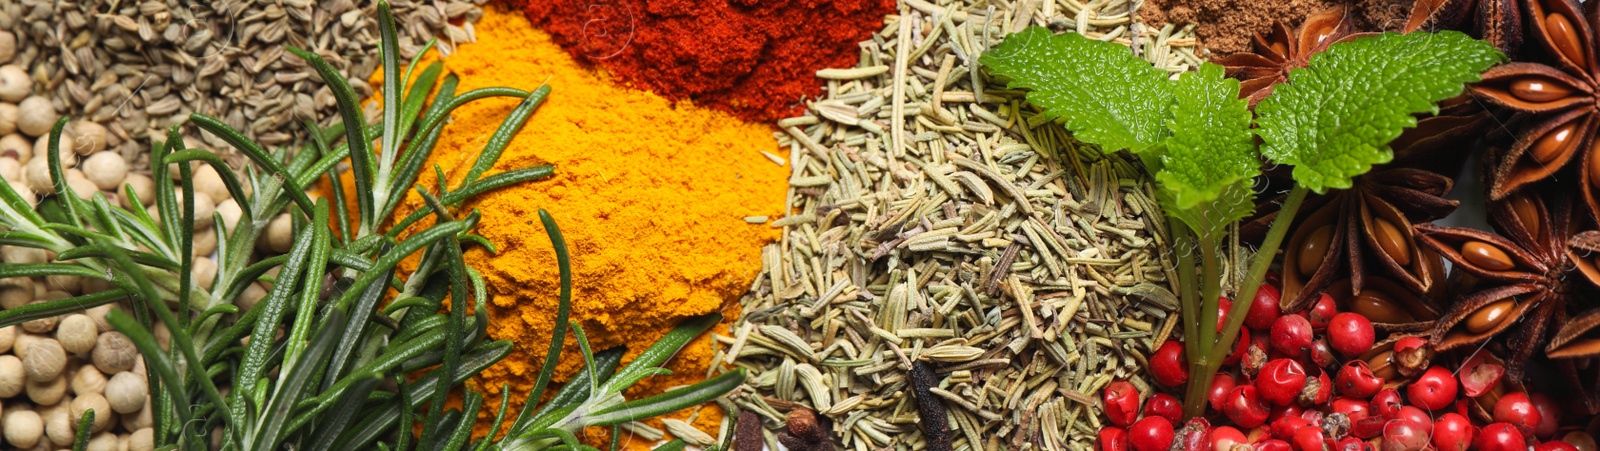 Image of Different fresh herbs with aromatic spices as background, top view. Banner design